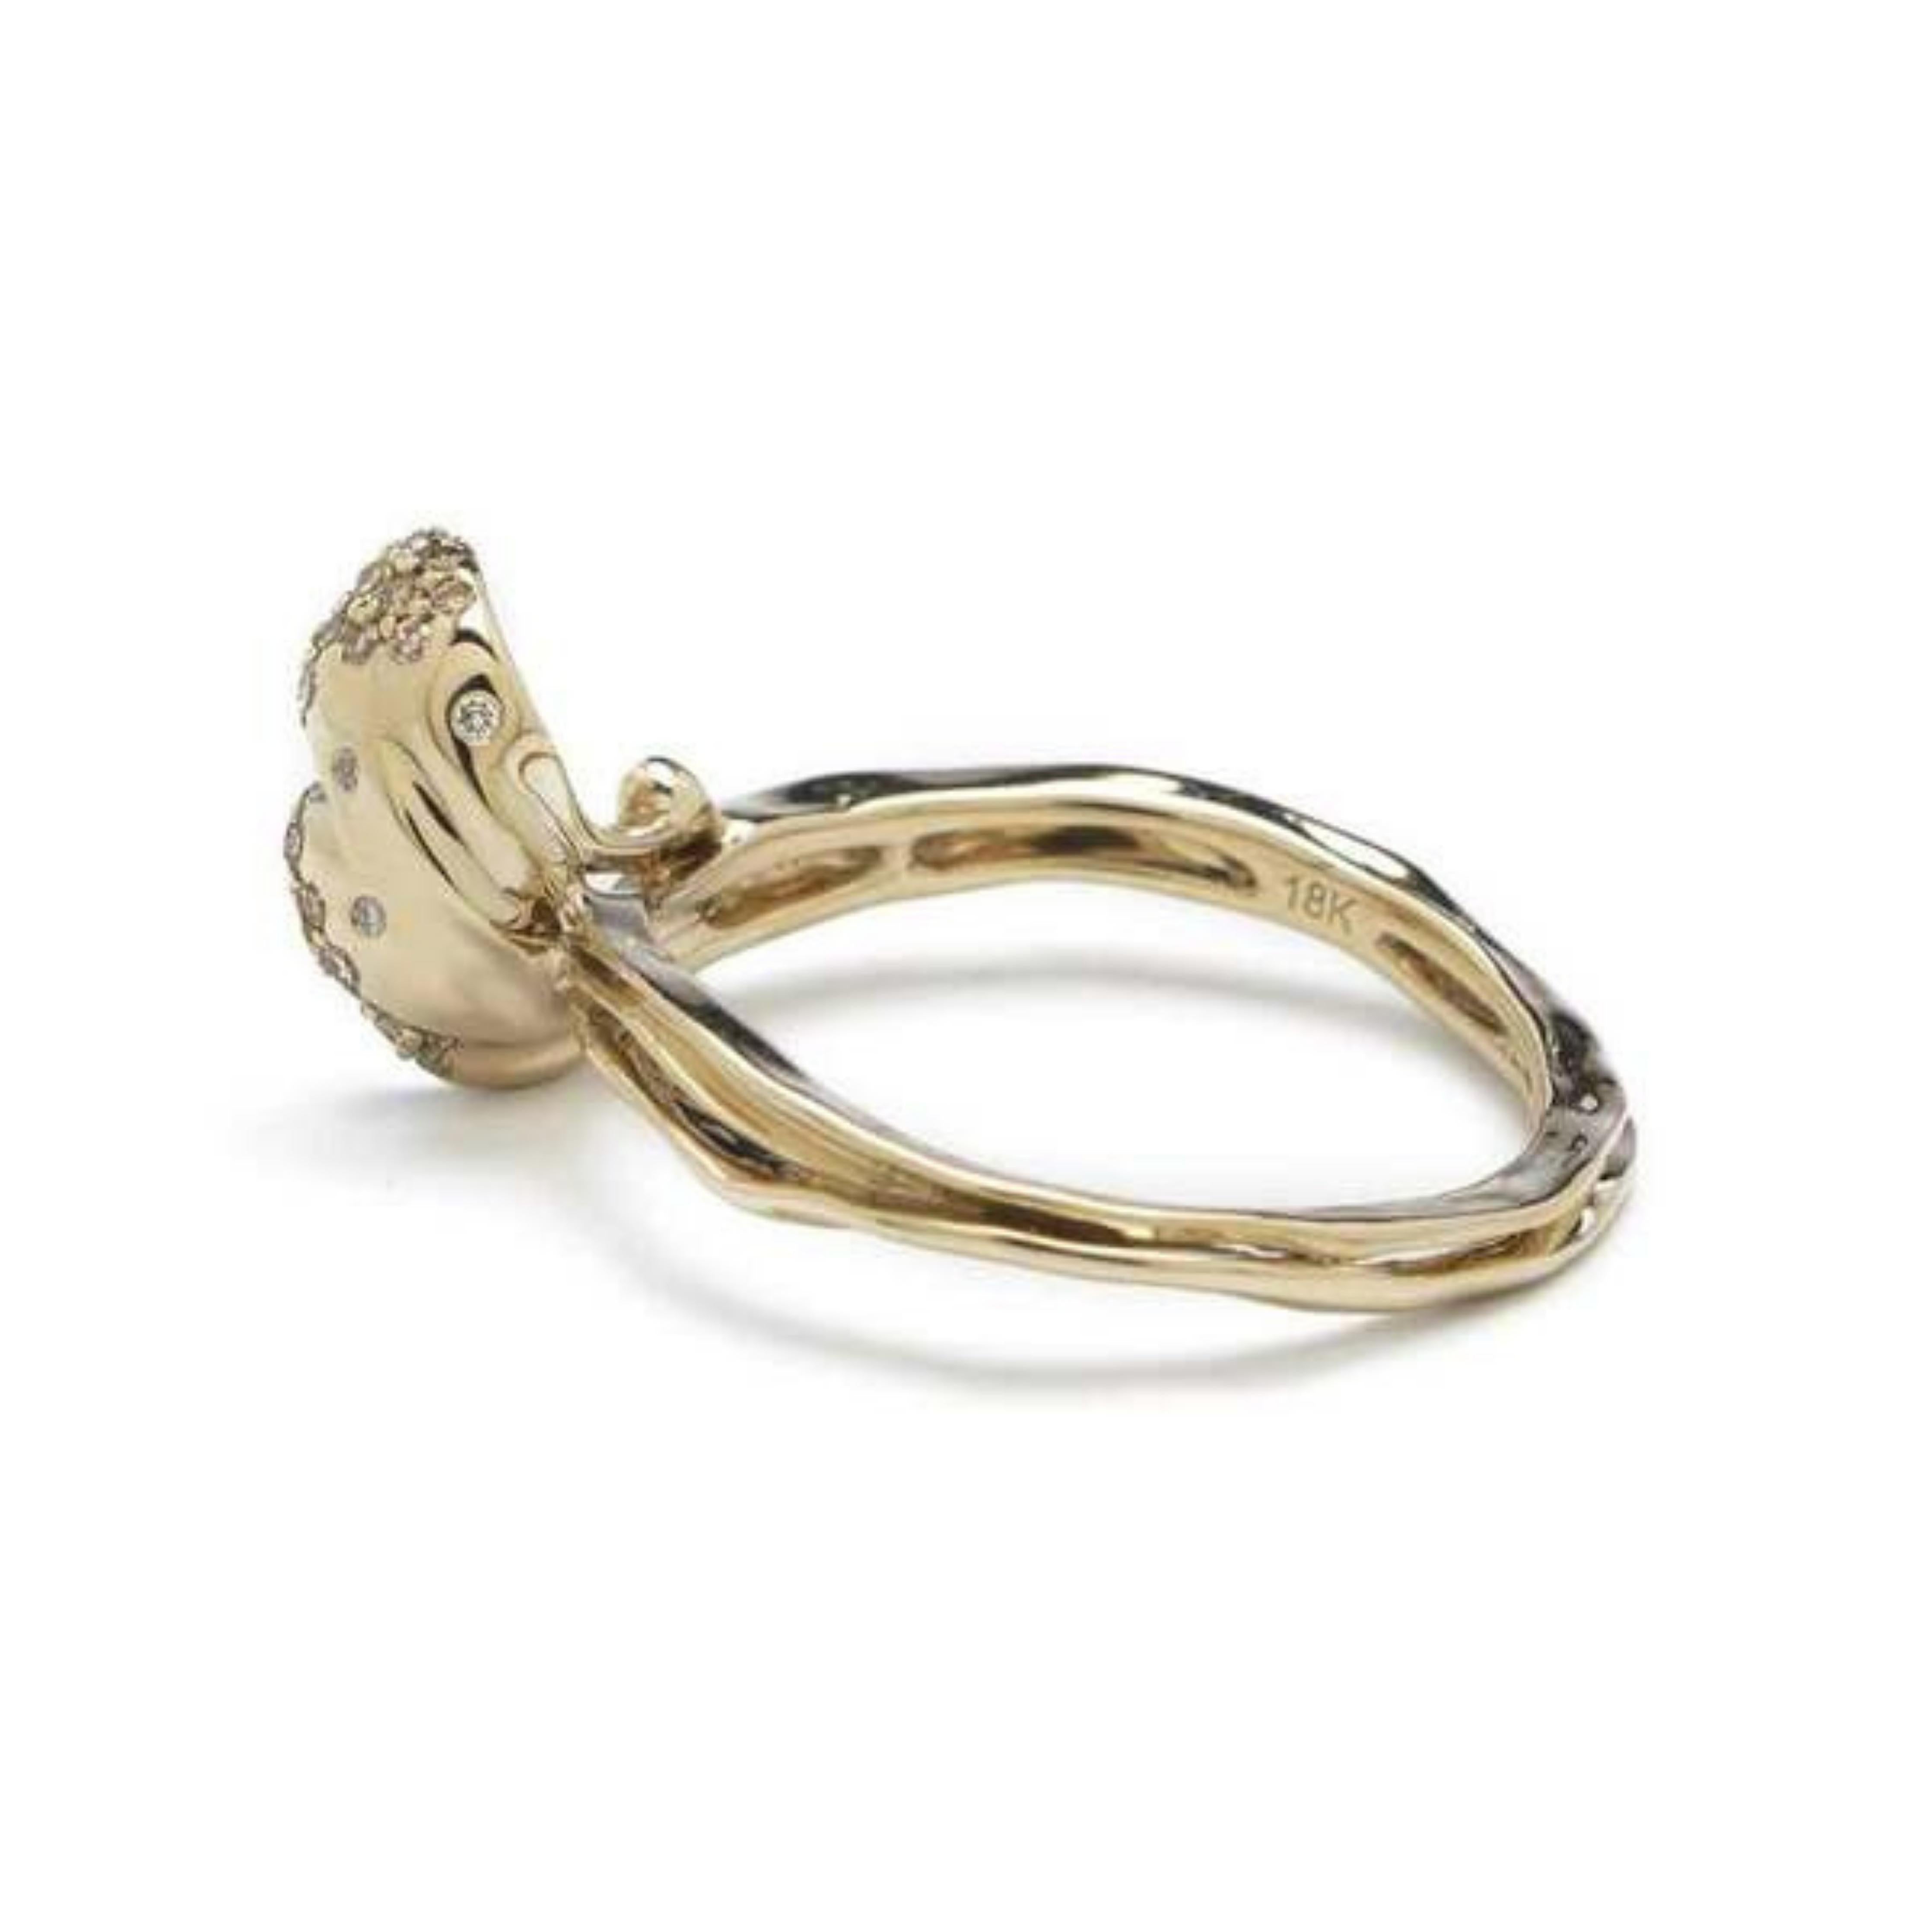 Wave Stackable Rings are three rings that can be snapped together to be worn as one piece, or purchased and worn as individual rings. Designed in pure 18k white gold, which has a slightly yellow tone, the rings are set with light brown and white diamonds Shown from interior.